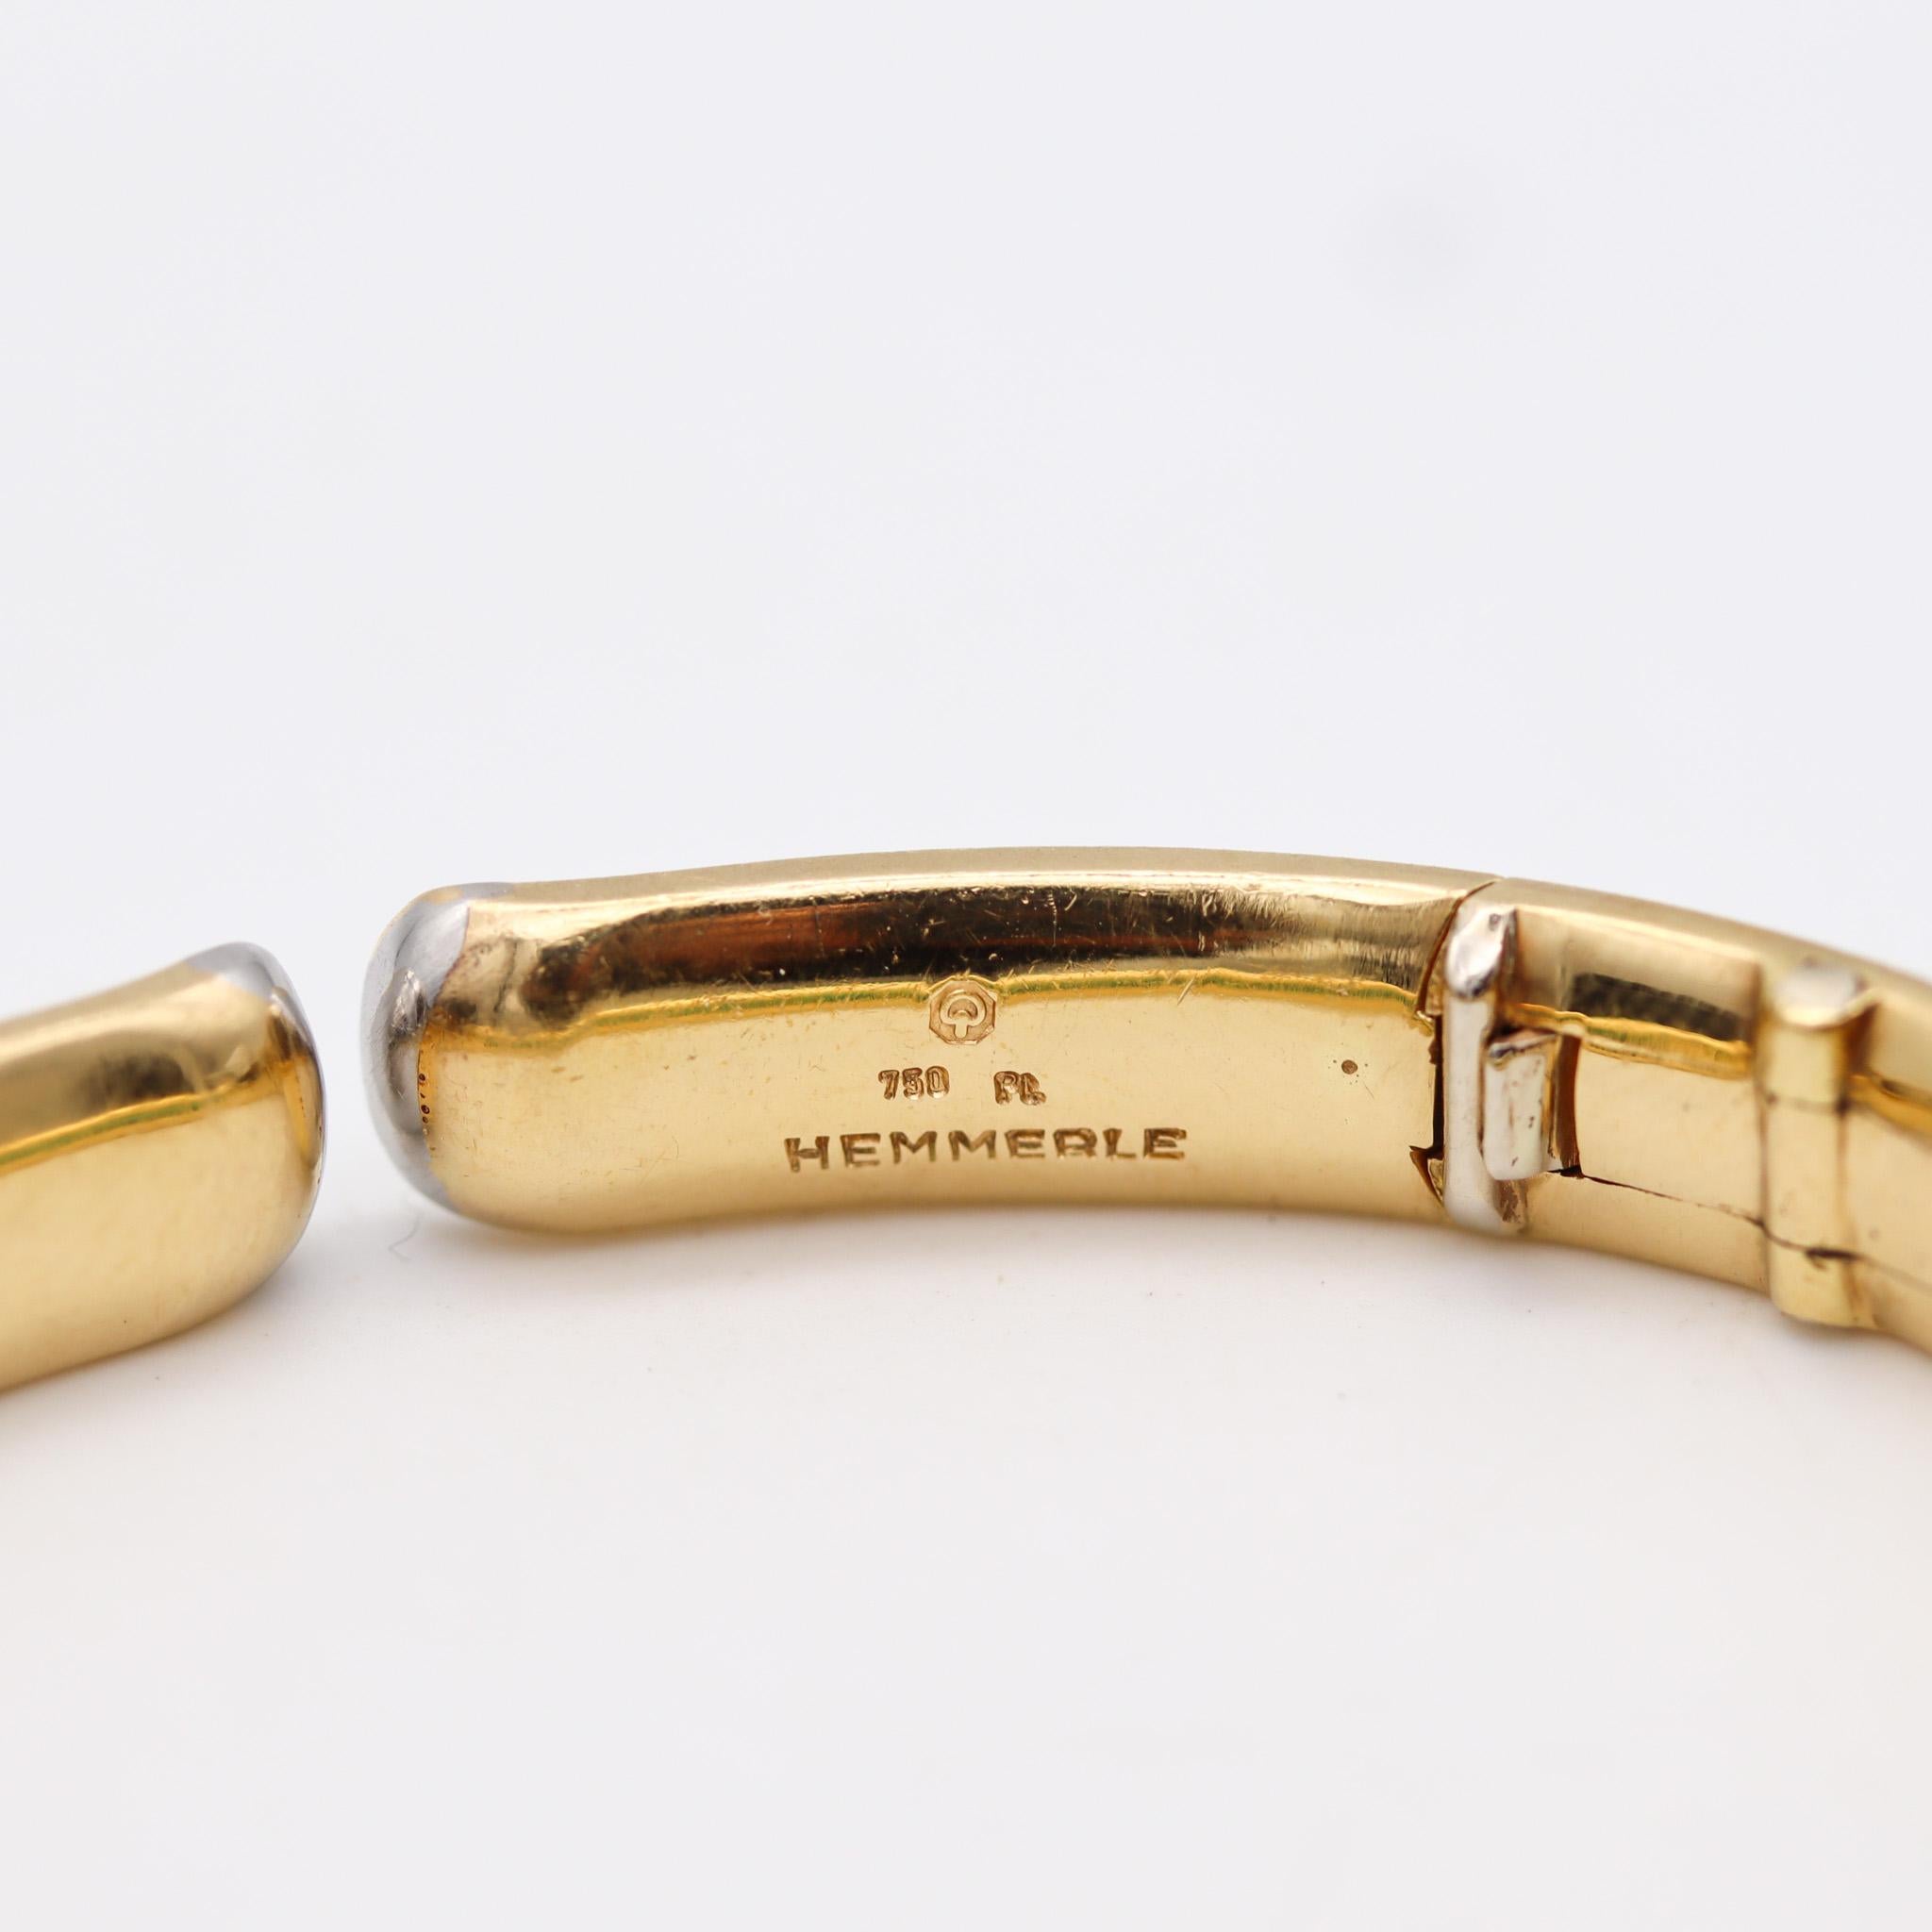 A bracelet with emeralds designed by Hemmerle.

An outstanding bracelet, created in Munich by the German jewelry house of Hemmerle. This beautiful and very chic piece of jewelry has been crafted in solid yellow gold of 18 karats with details in